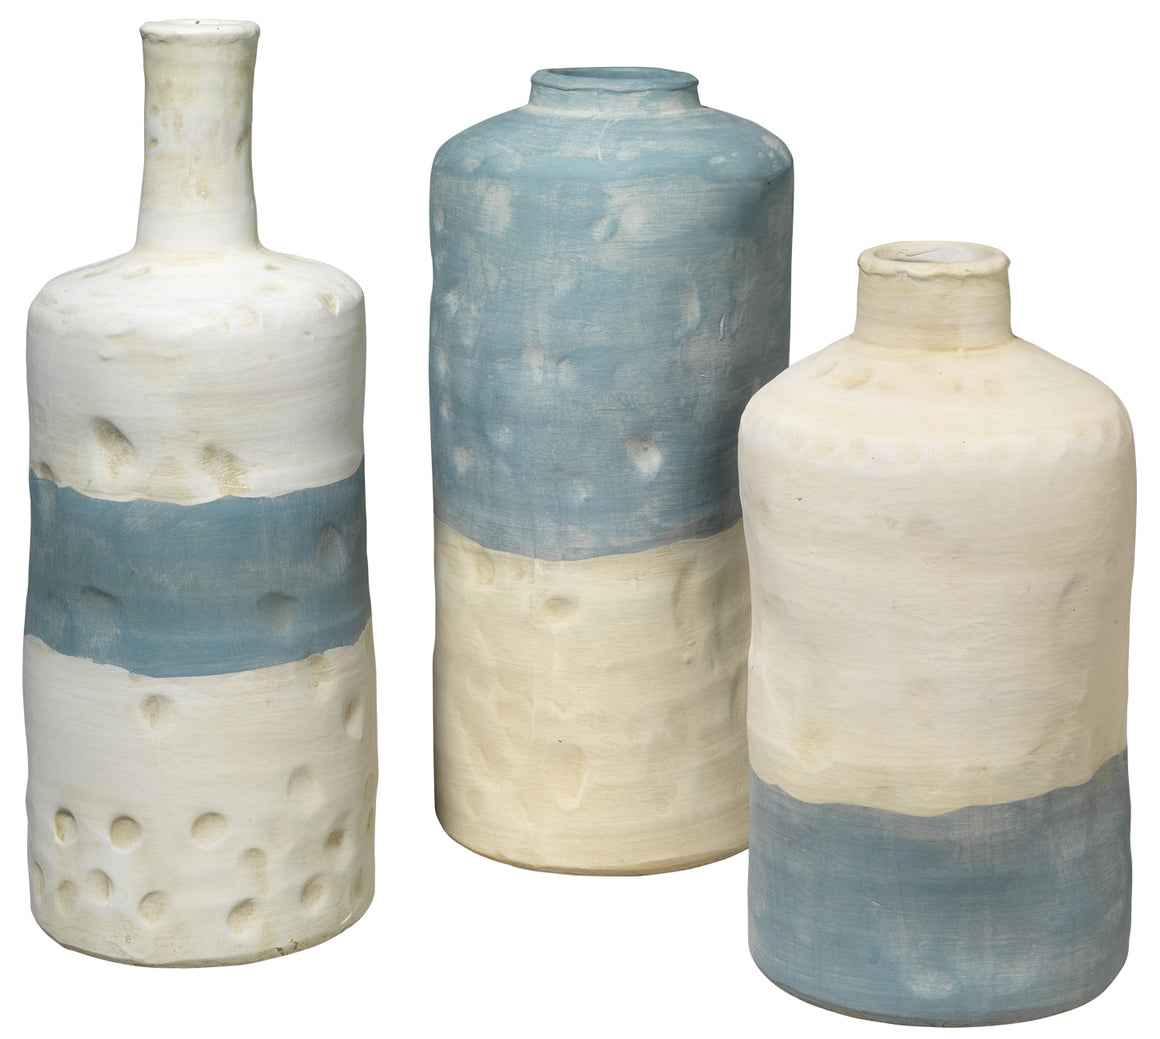 Sedona Vessels in Blue and White Ceramic (Set of 3)